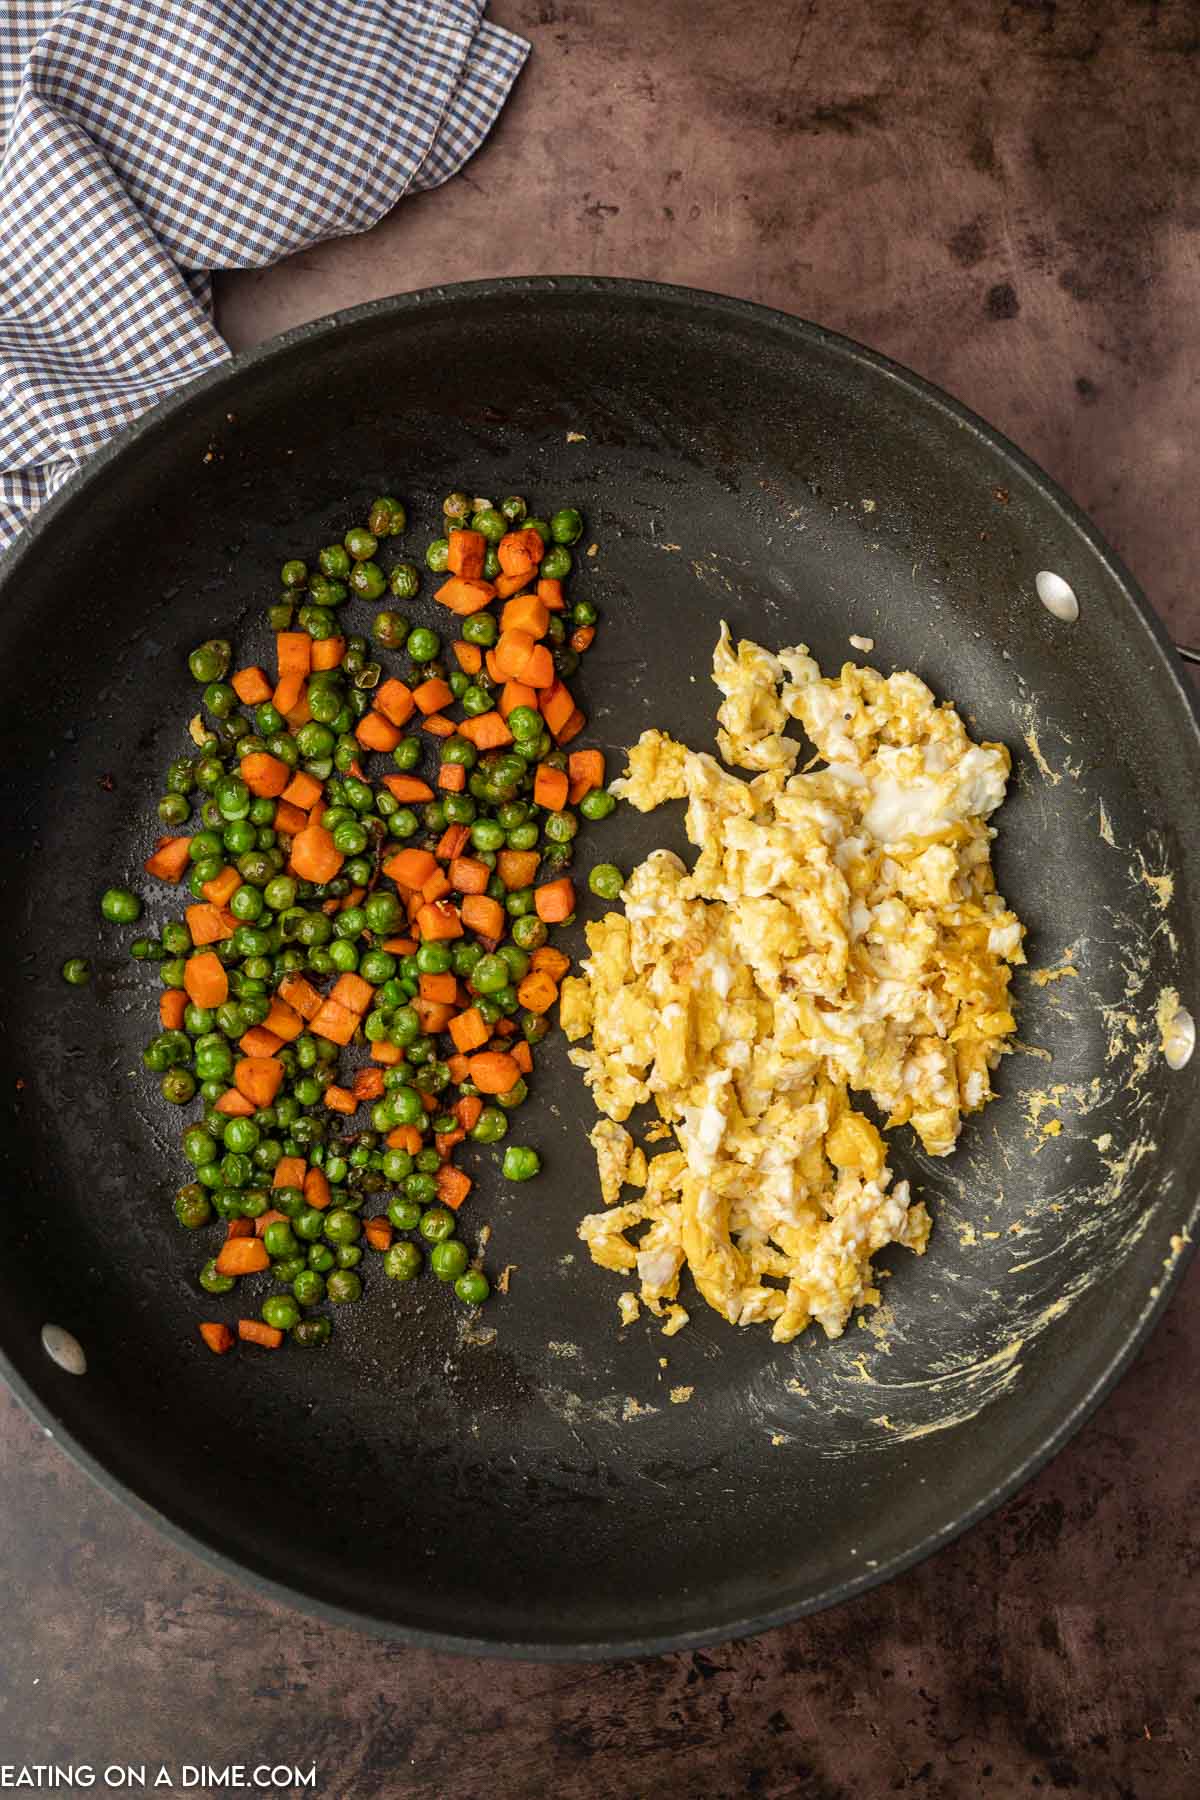 Cooking the frozen veggies and scrambling the egg